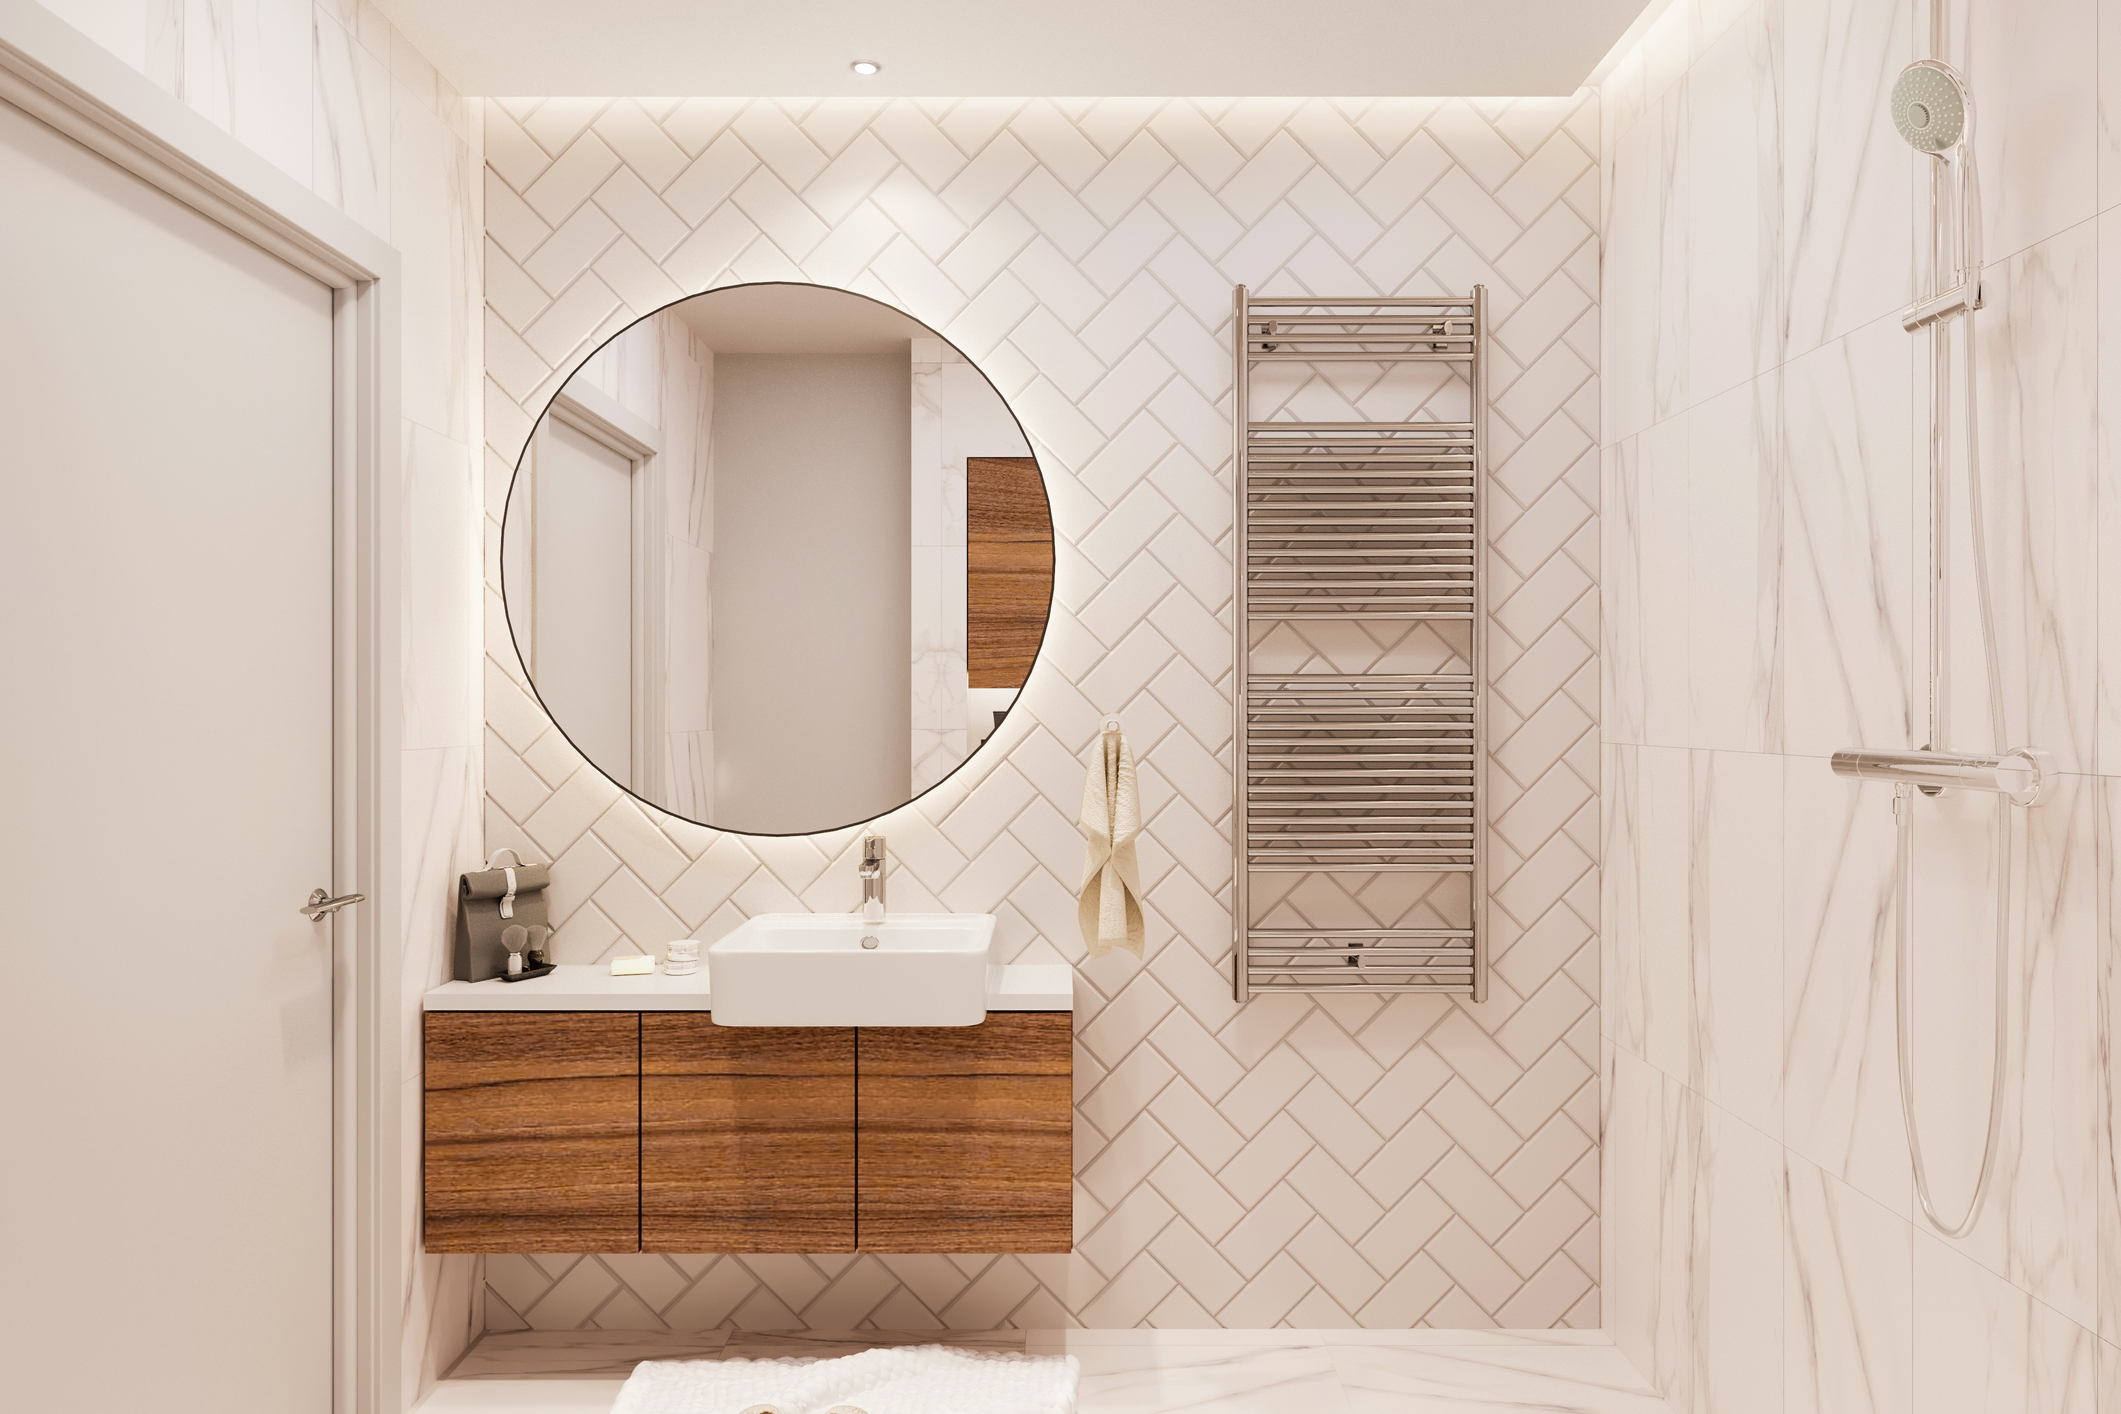 A bathroom wall decorated with herringbone tile behind the vanity and mirror. 